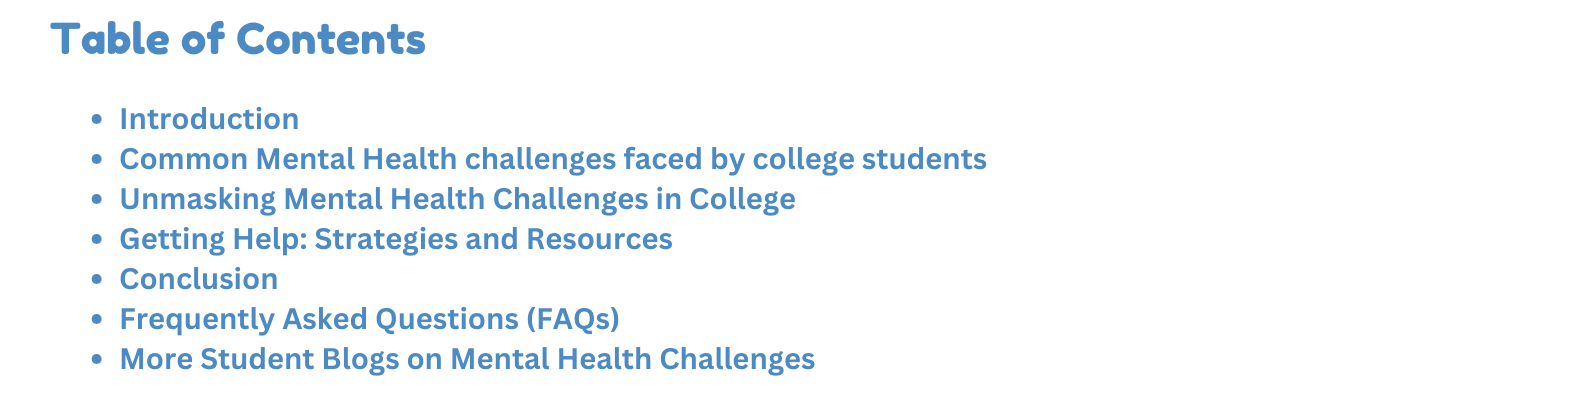 Table of contents - for mental health challenges experienced by college students in university 